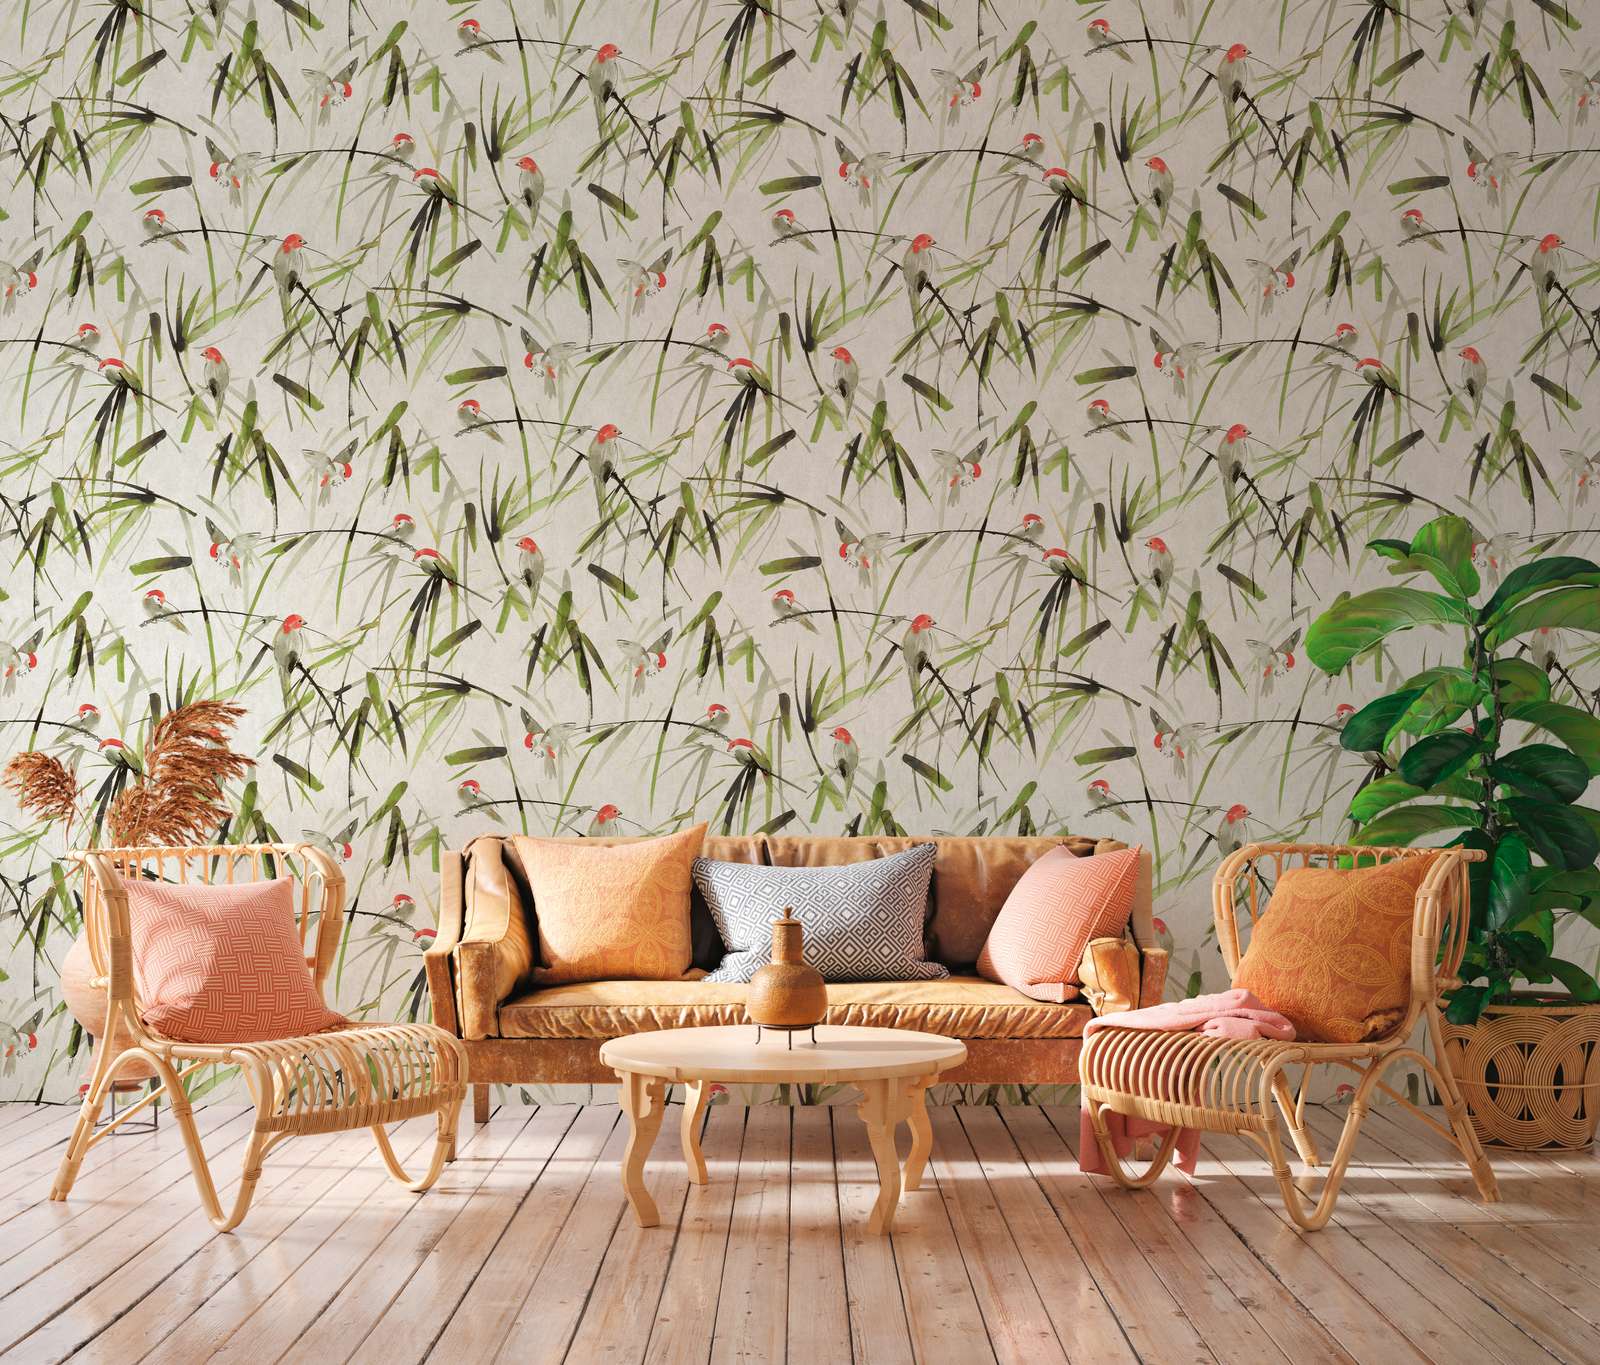             Non-woven wallpaper leaves with birds on a light background - beige, green, black
        